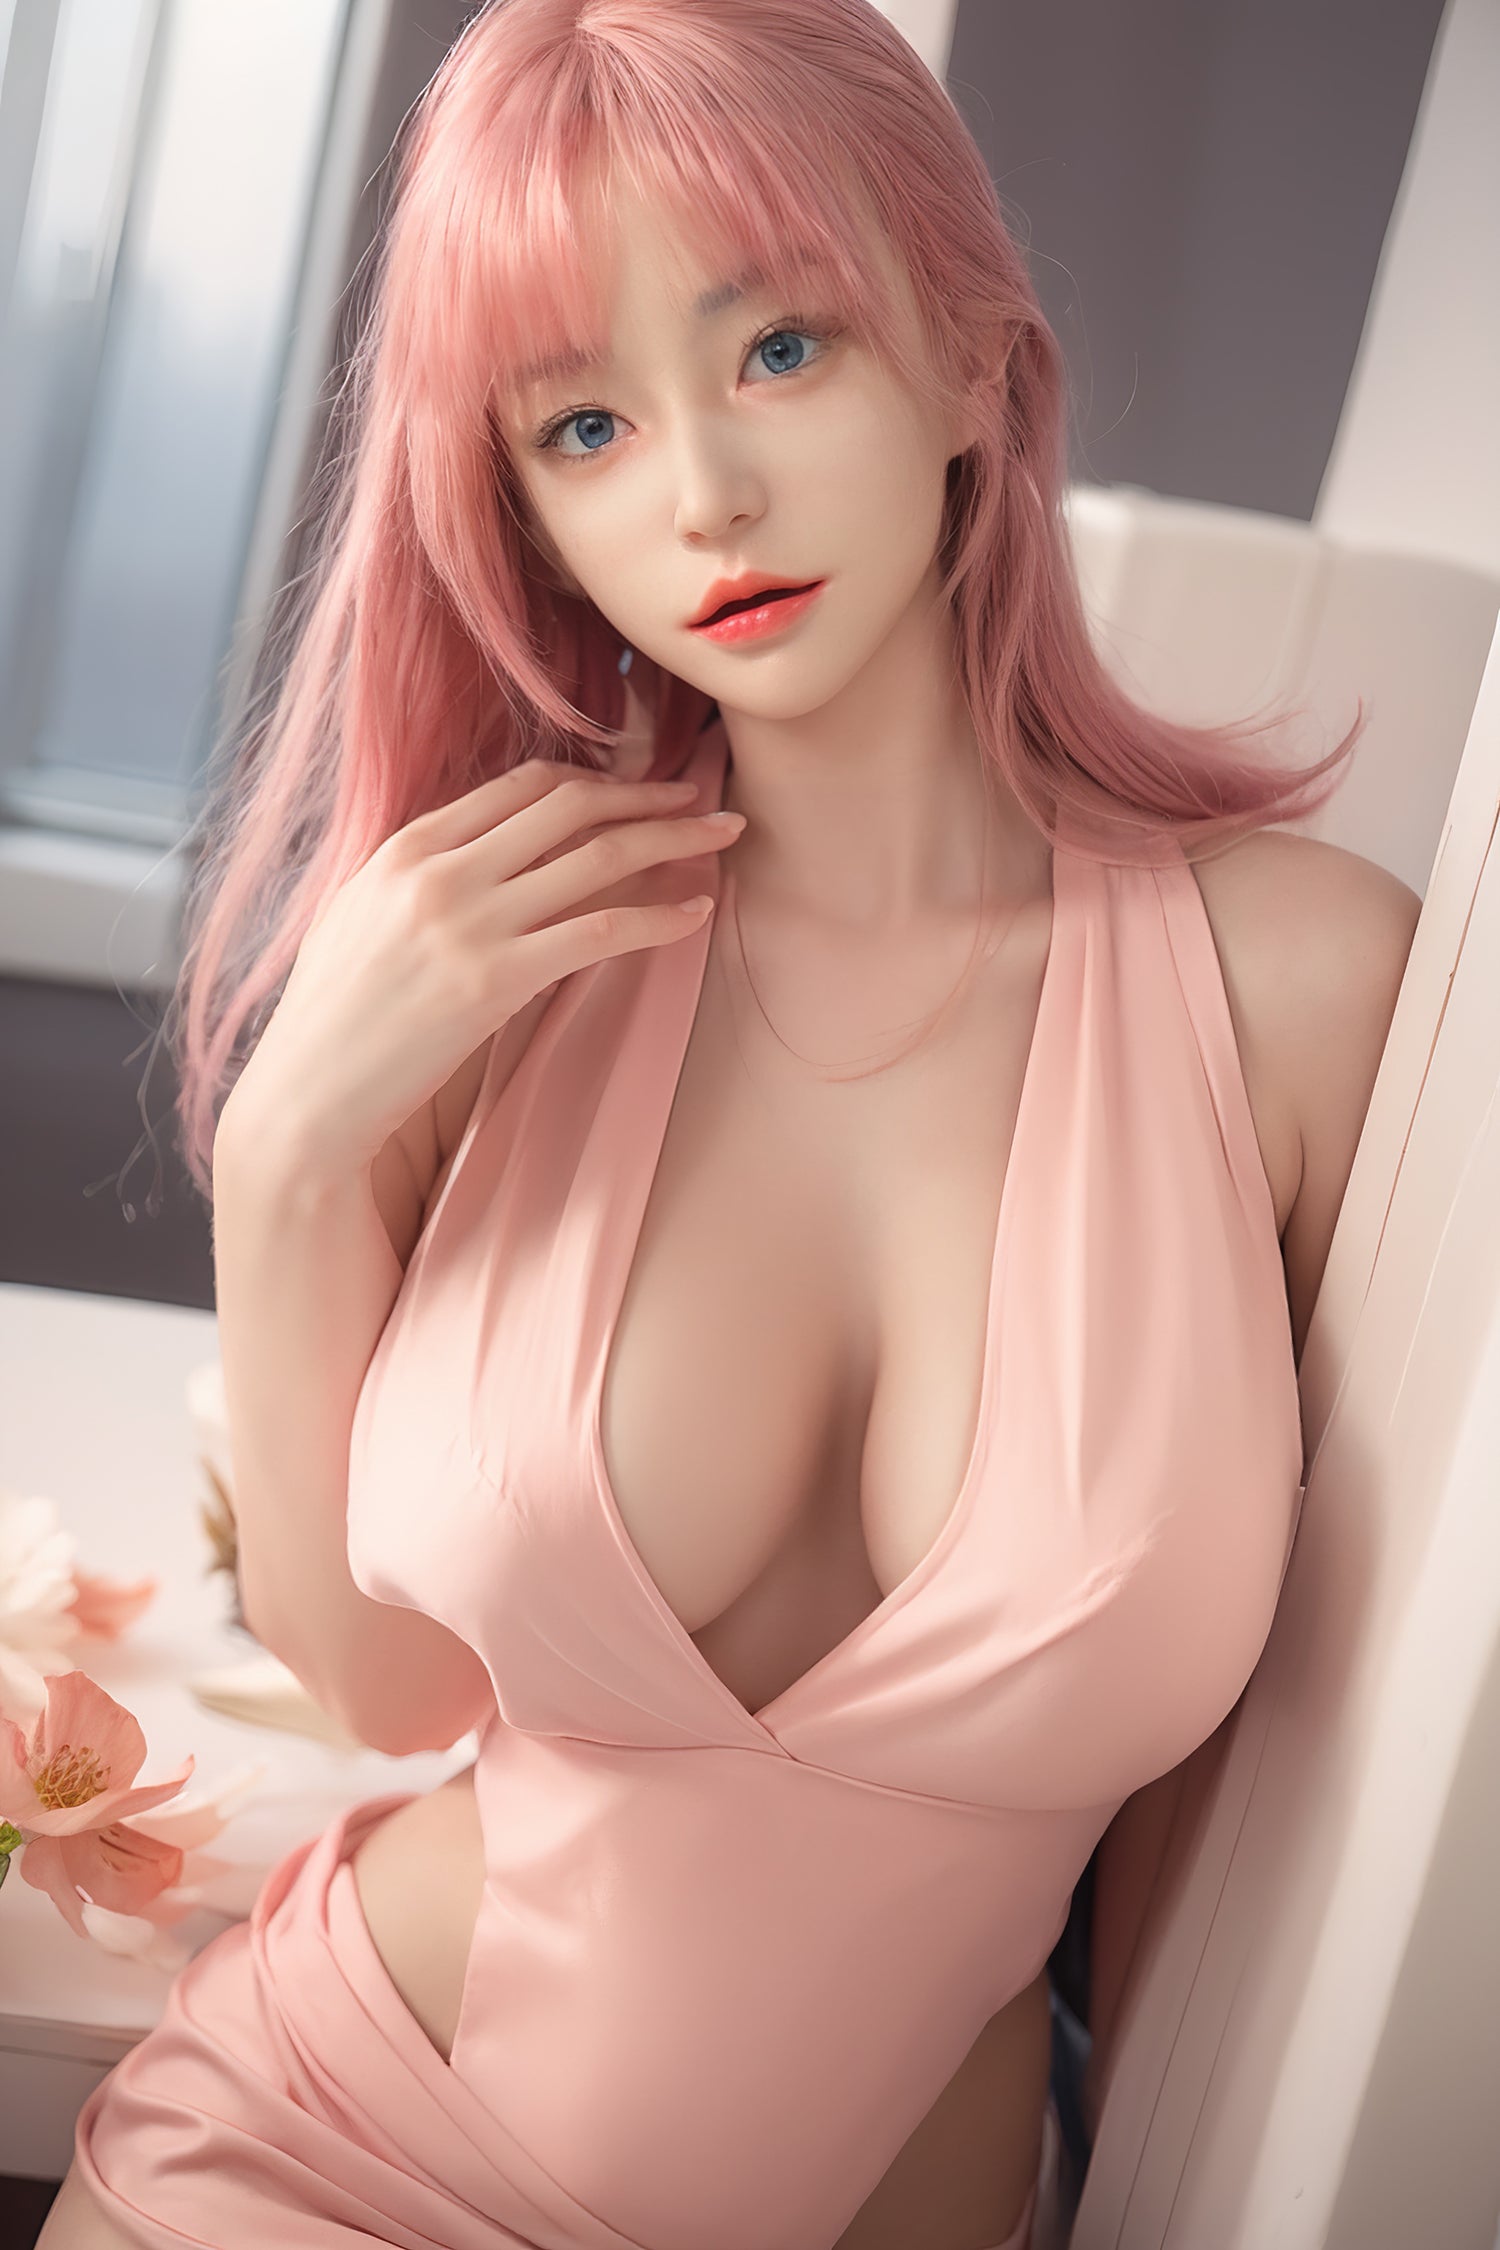 US Stock - Loly 164cm Realisitc Full Silicone Sex Doll Adult Blowjob Oral Sex Love Doll